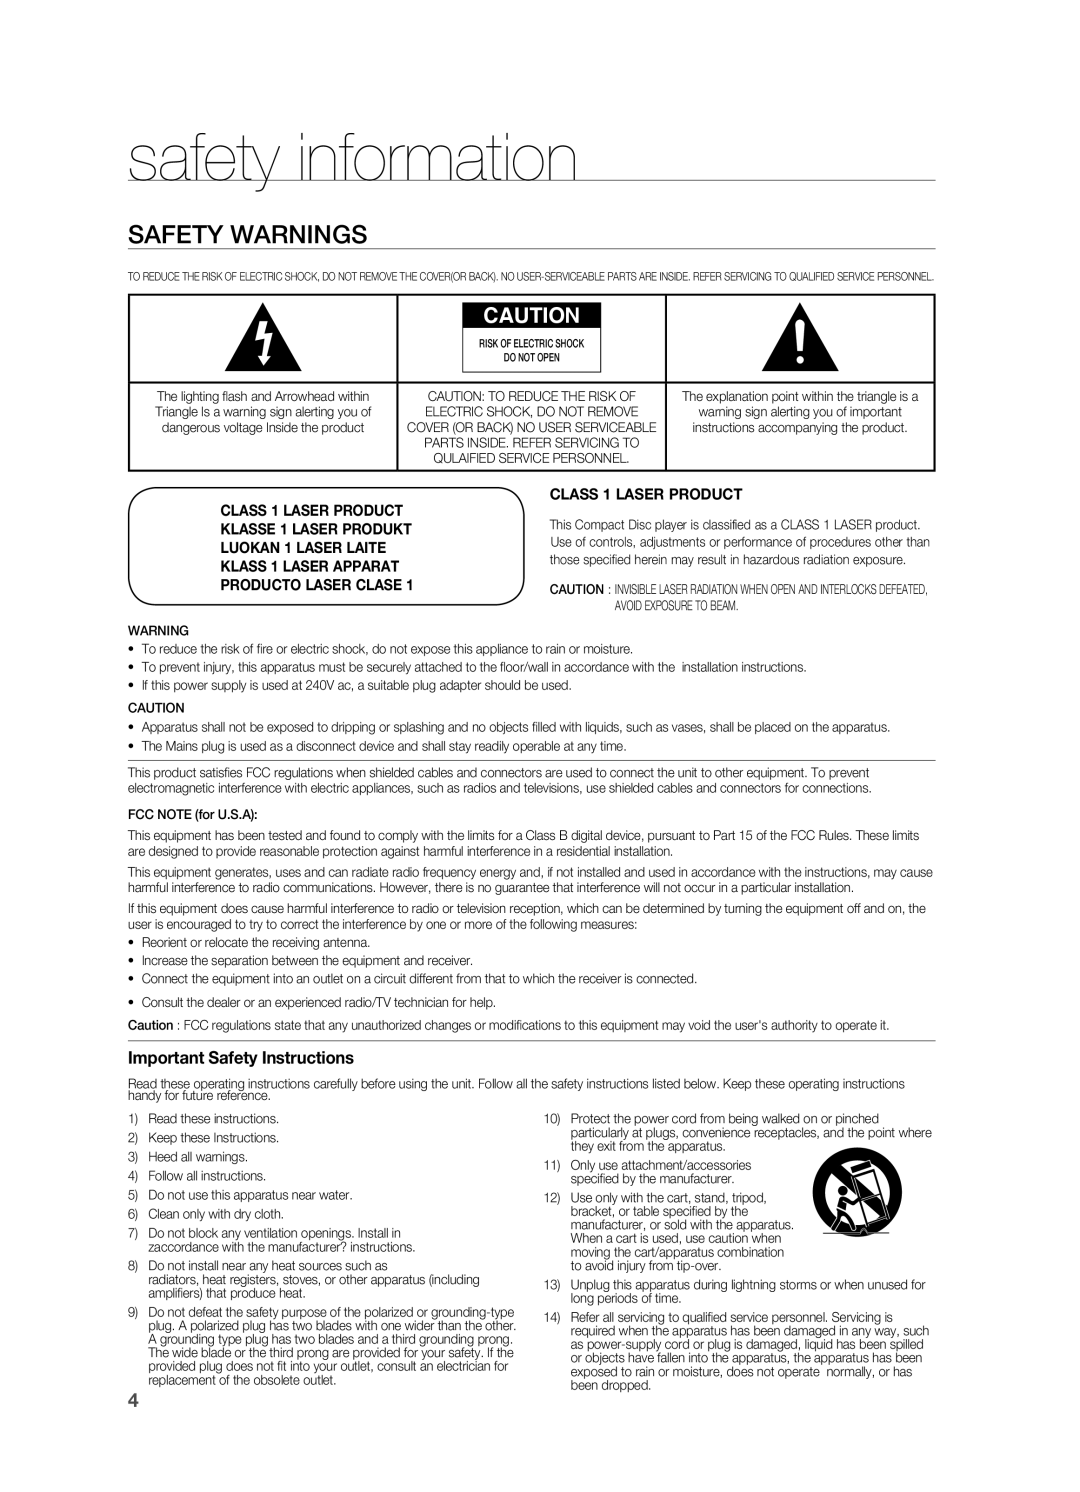 Samsung AH68-02019S manual safety information, Safety Warnings, Important Safety Instructions, Producto Laser Clase 